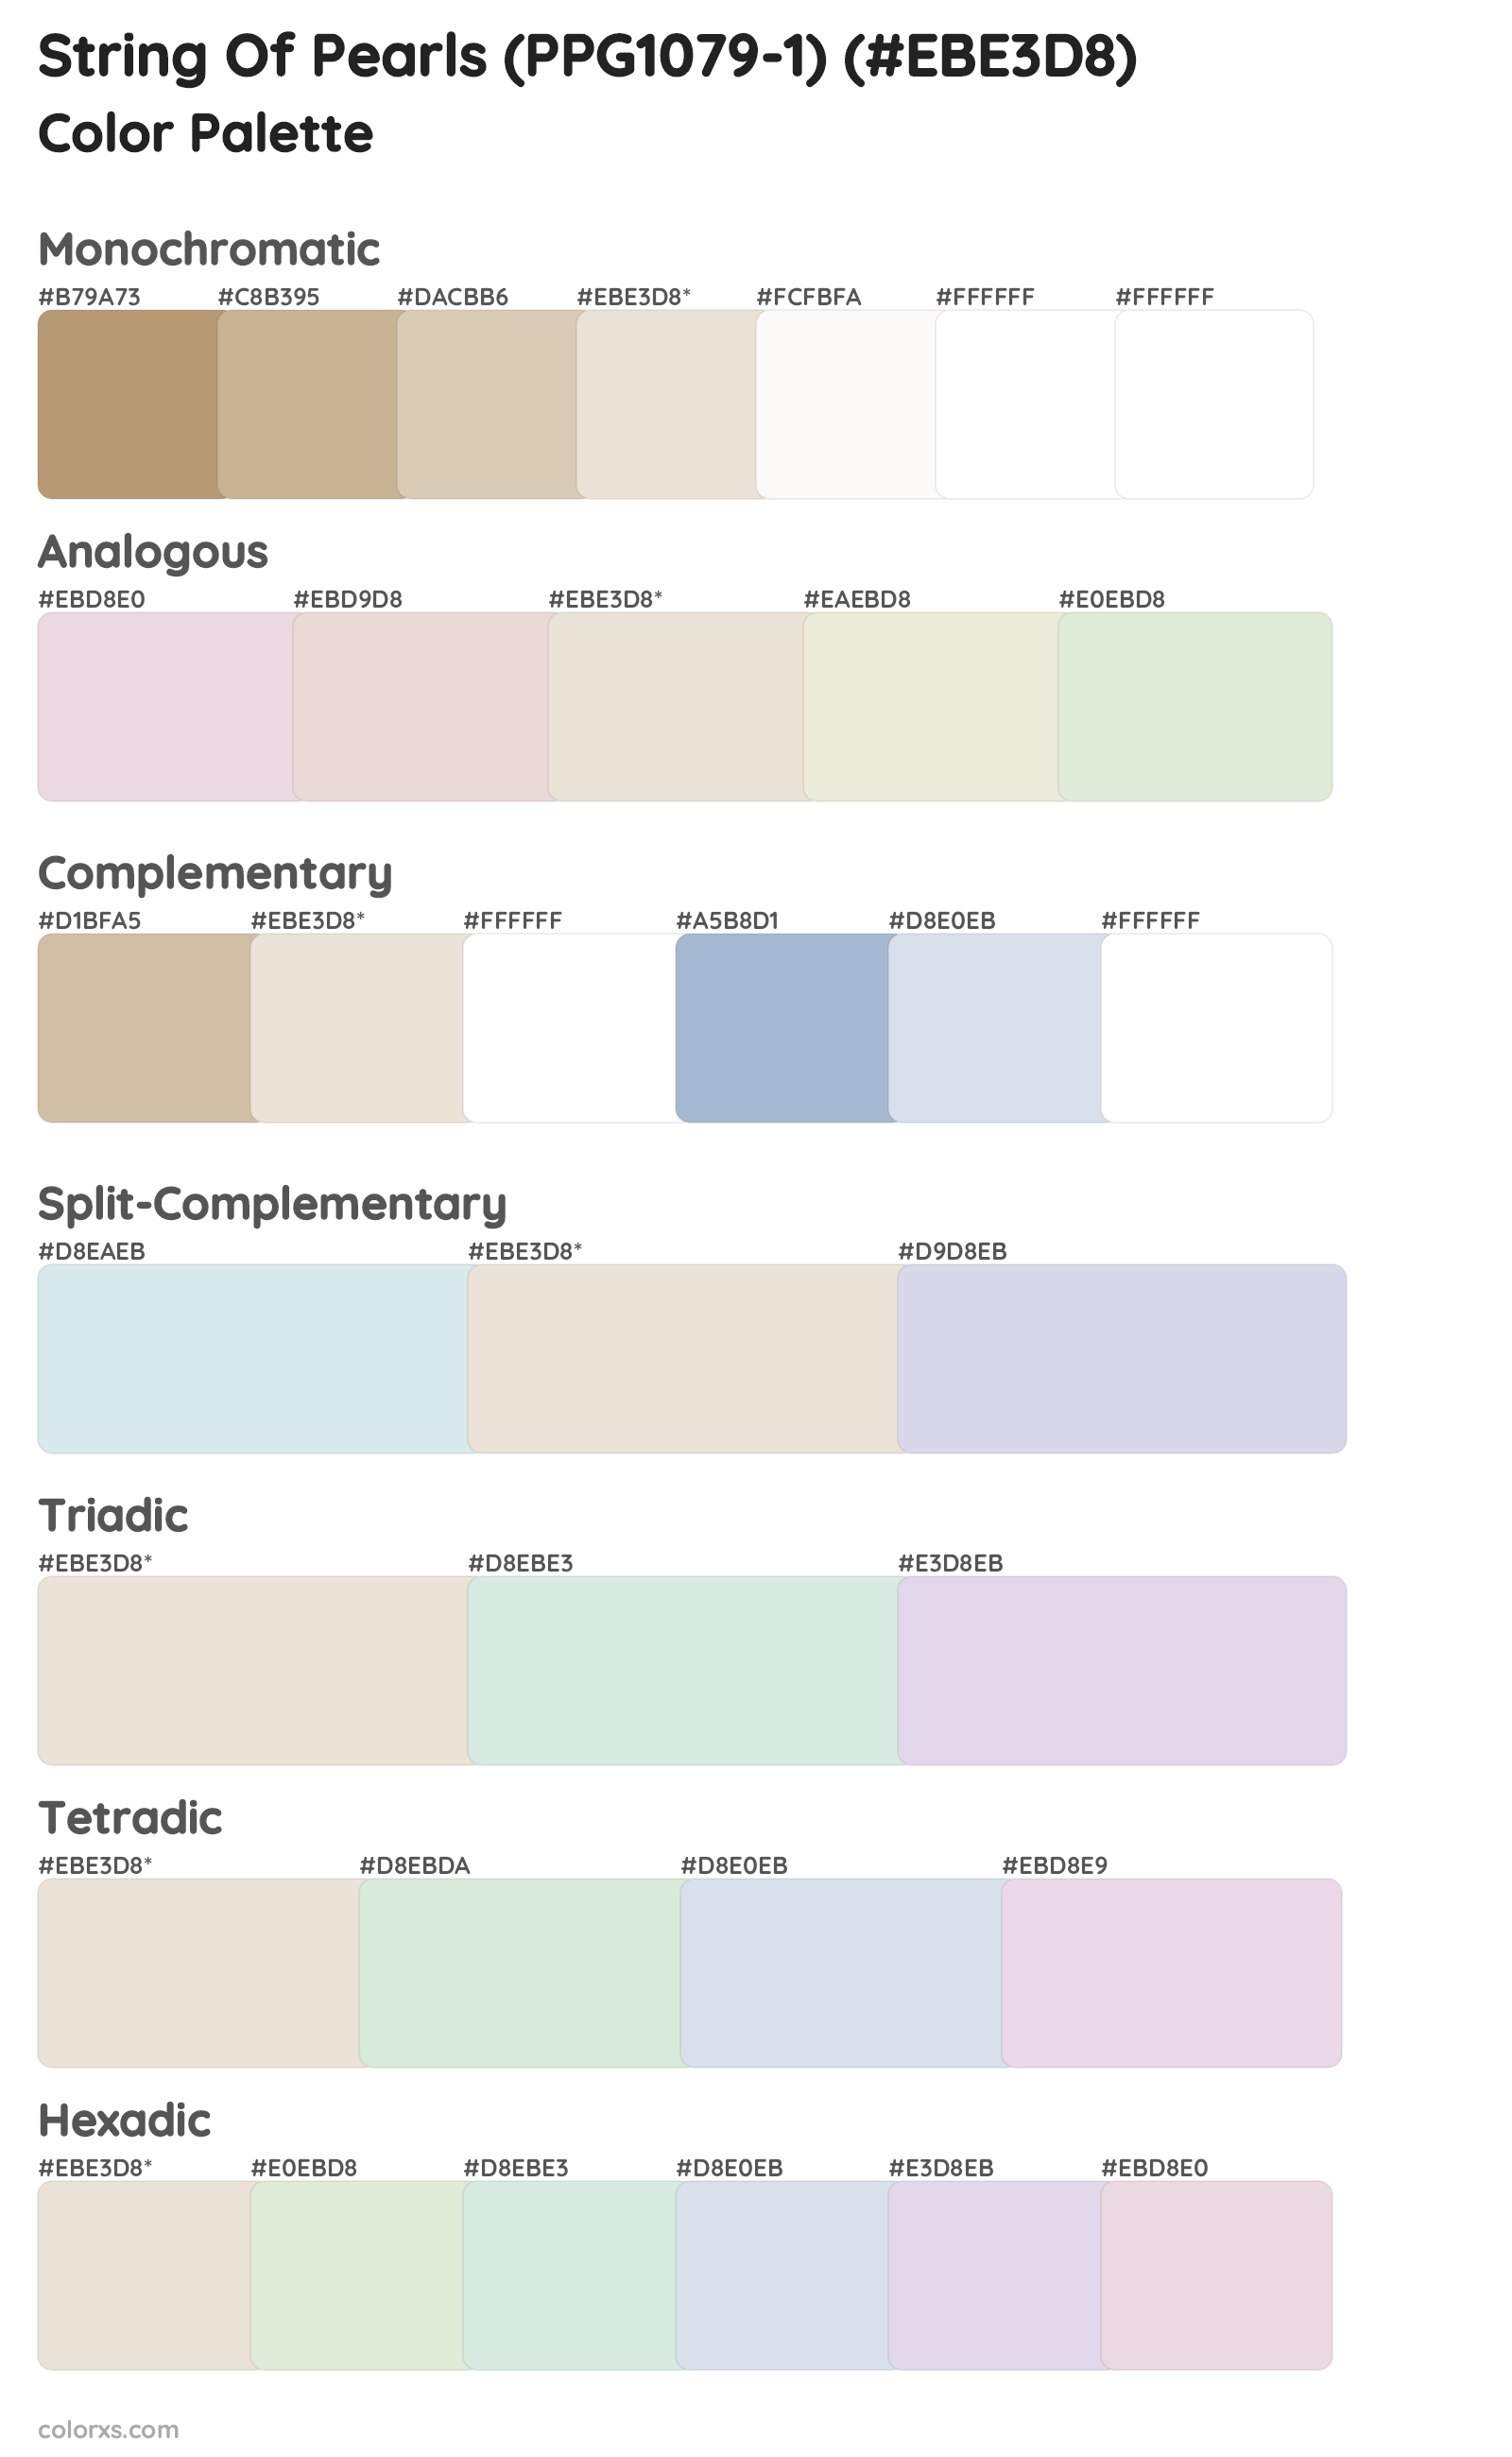 String Of Pearls (PPG1079-1) Color Scheme Palettes